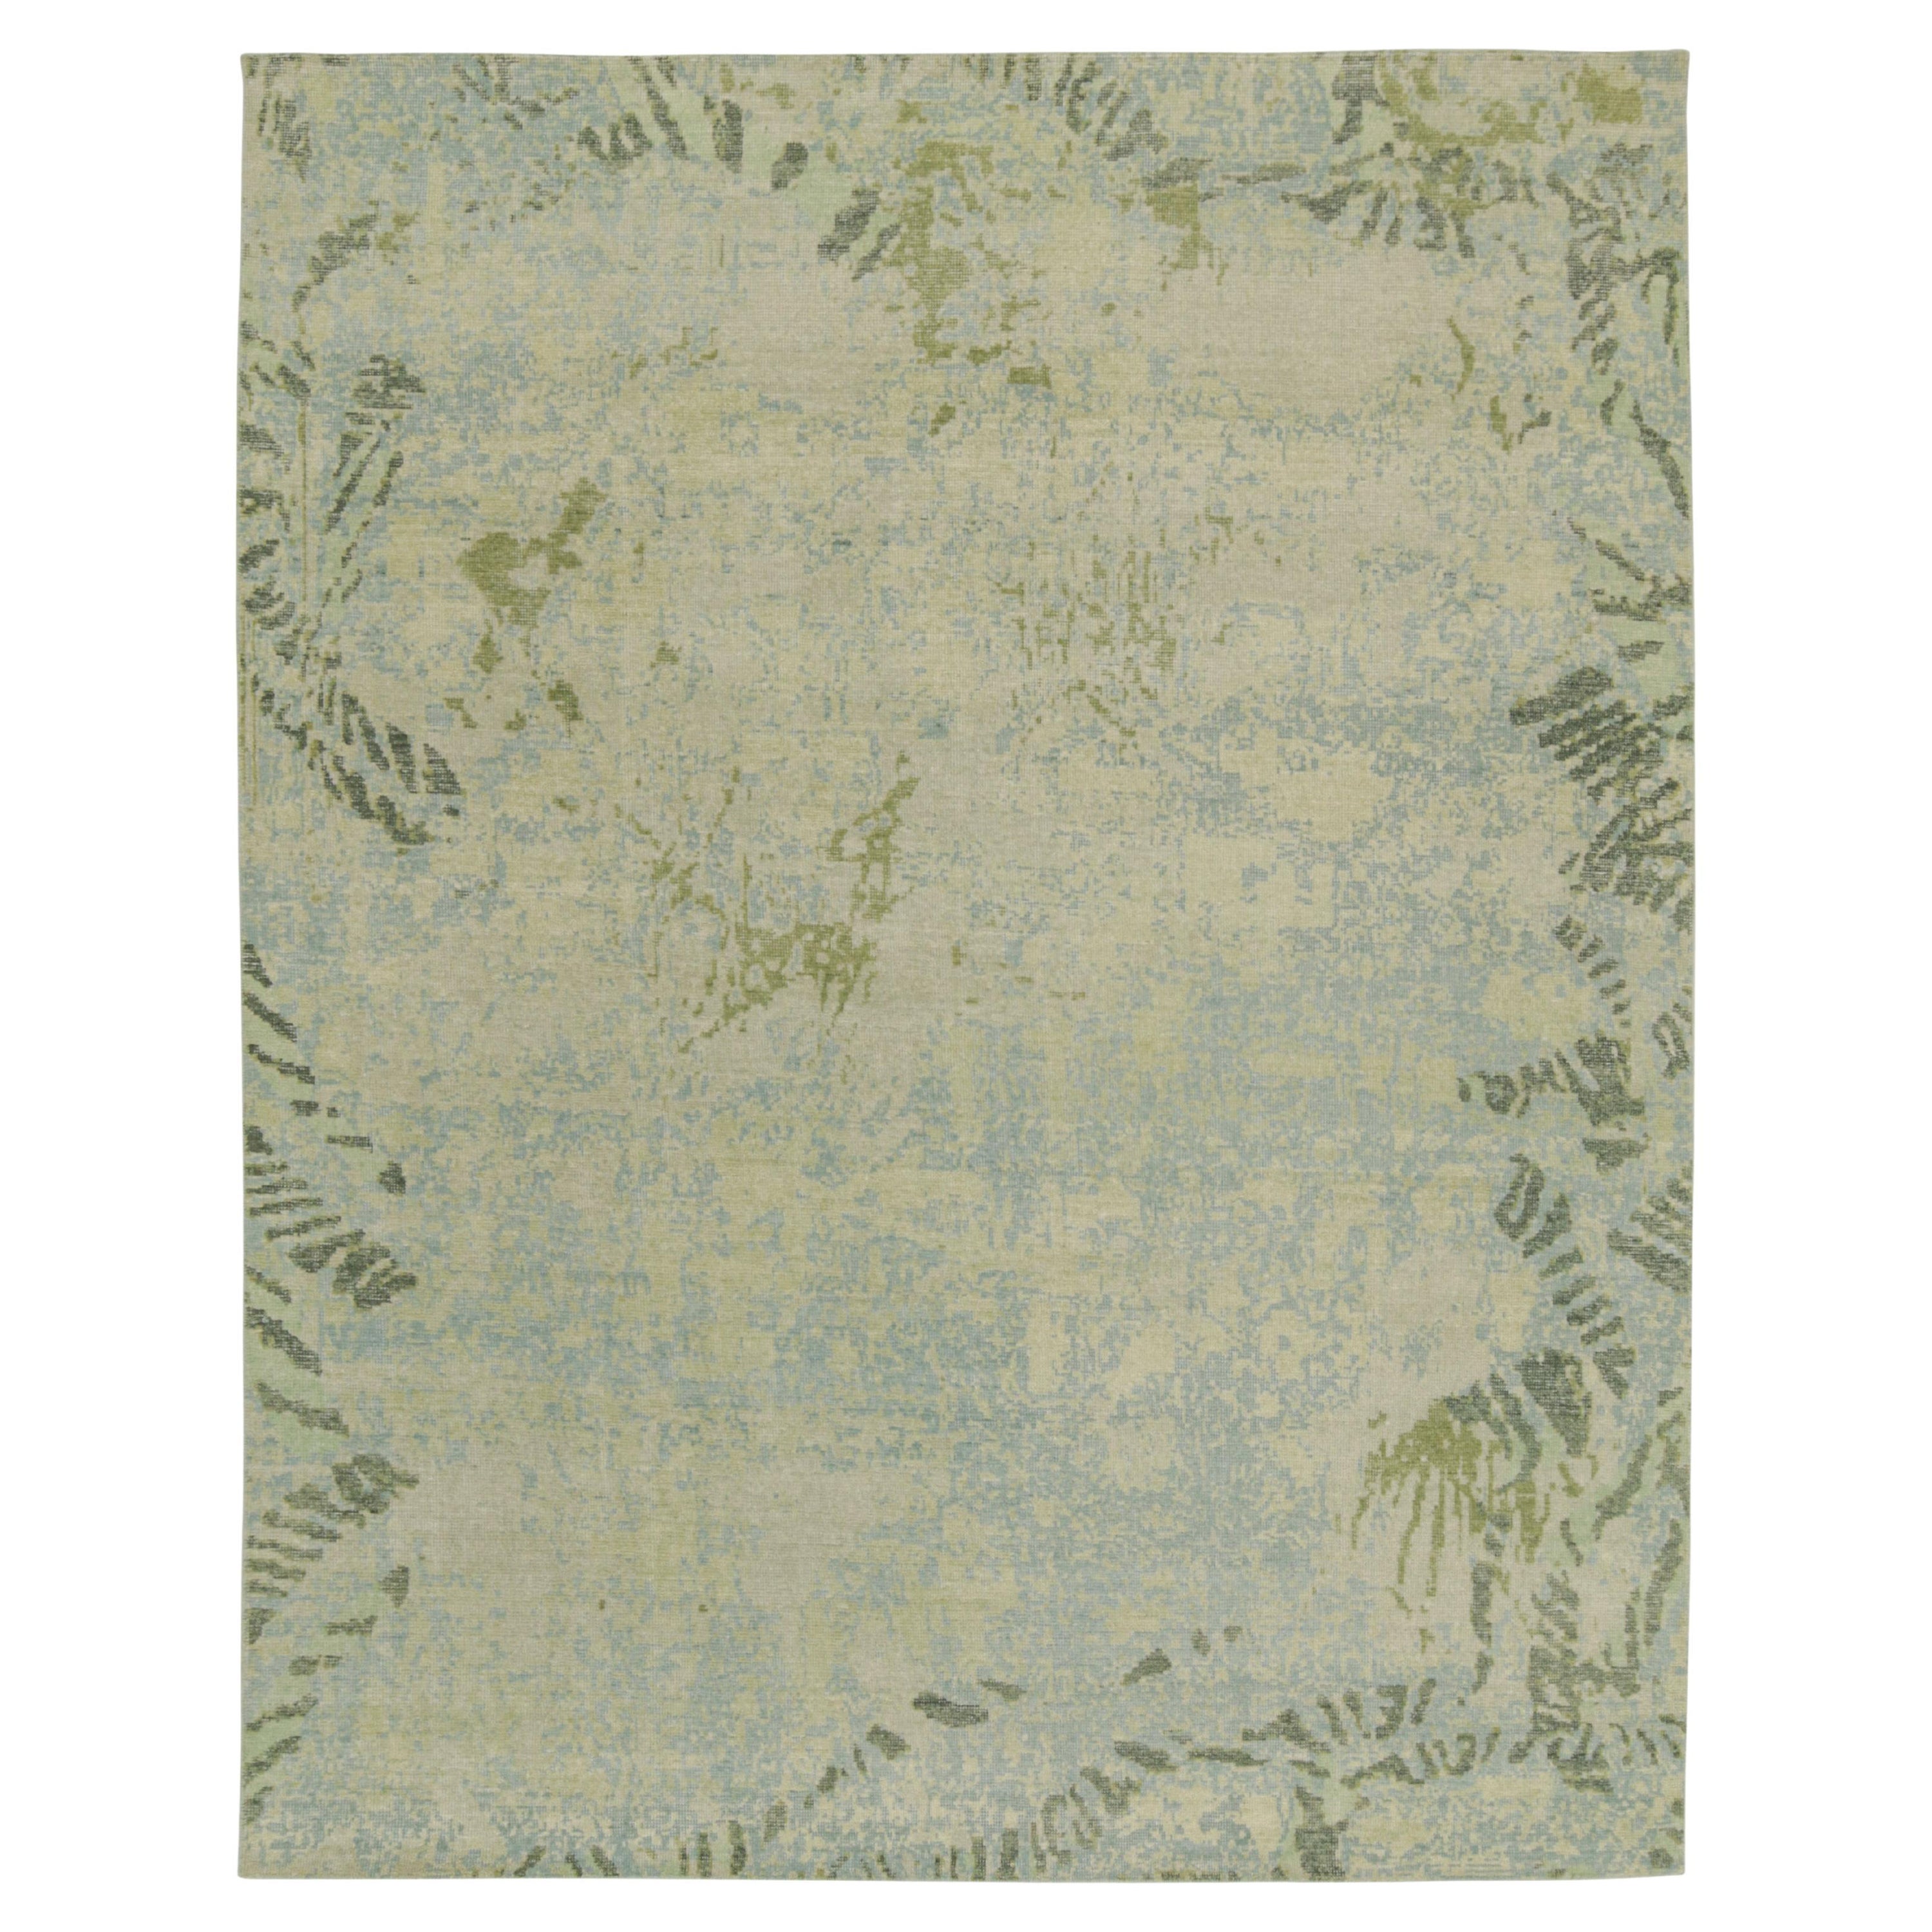 Rug & Kilim's Distressed Style Abstract Rug in Blue, Gray and Green Pattern (Tapis abstrait à motifs bleus, gris et verts) en vente